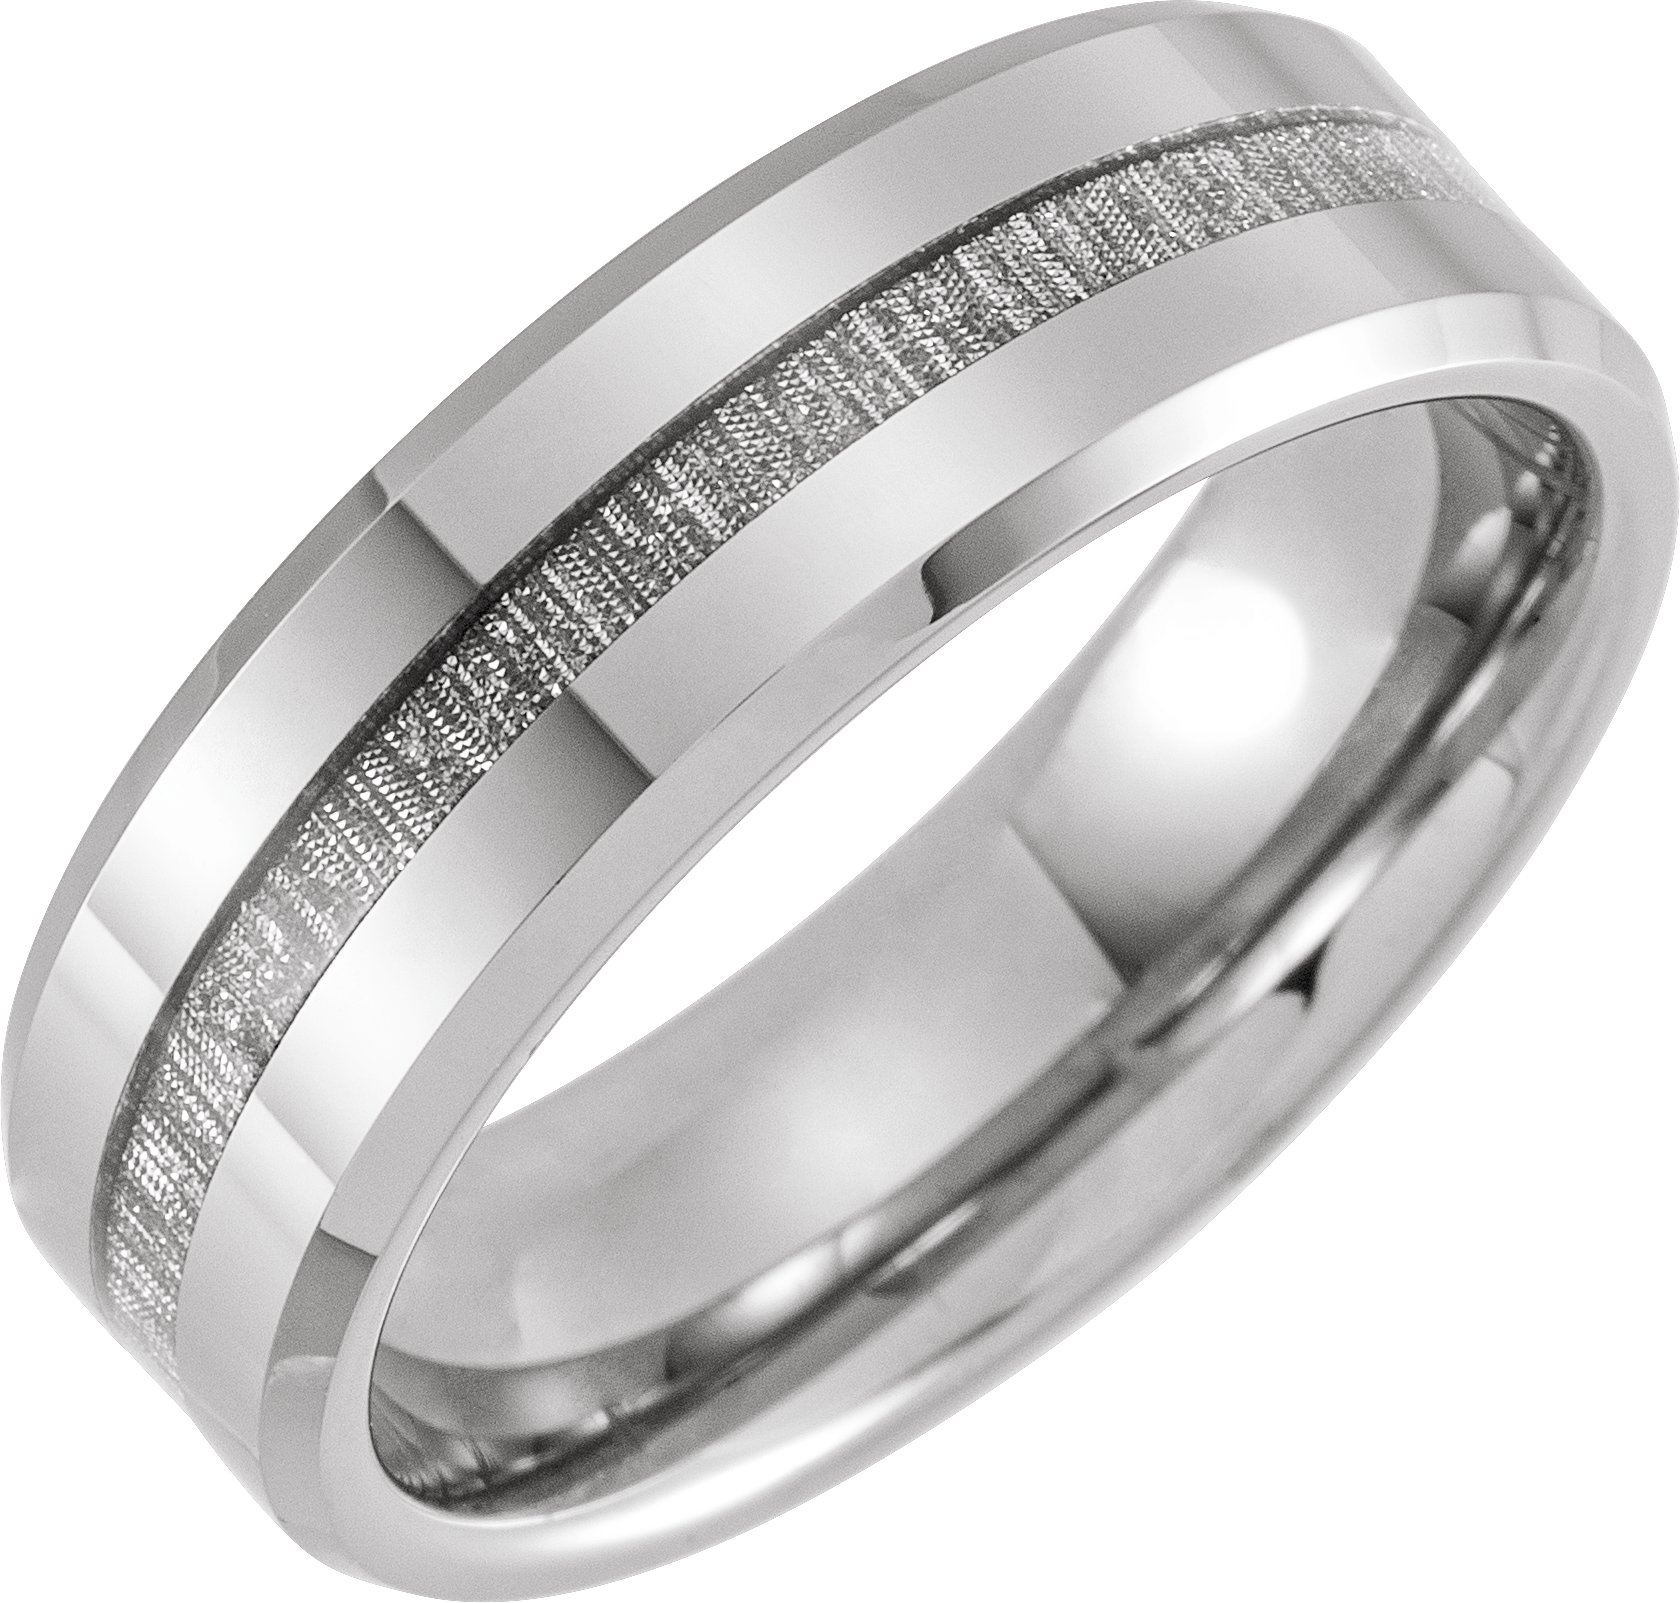 Tungsten 8 mm Beveled Band with Manmade Meteorite Inlay Size 7